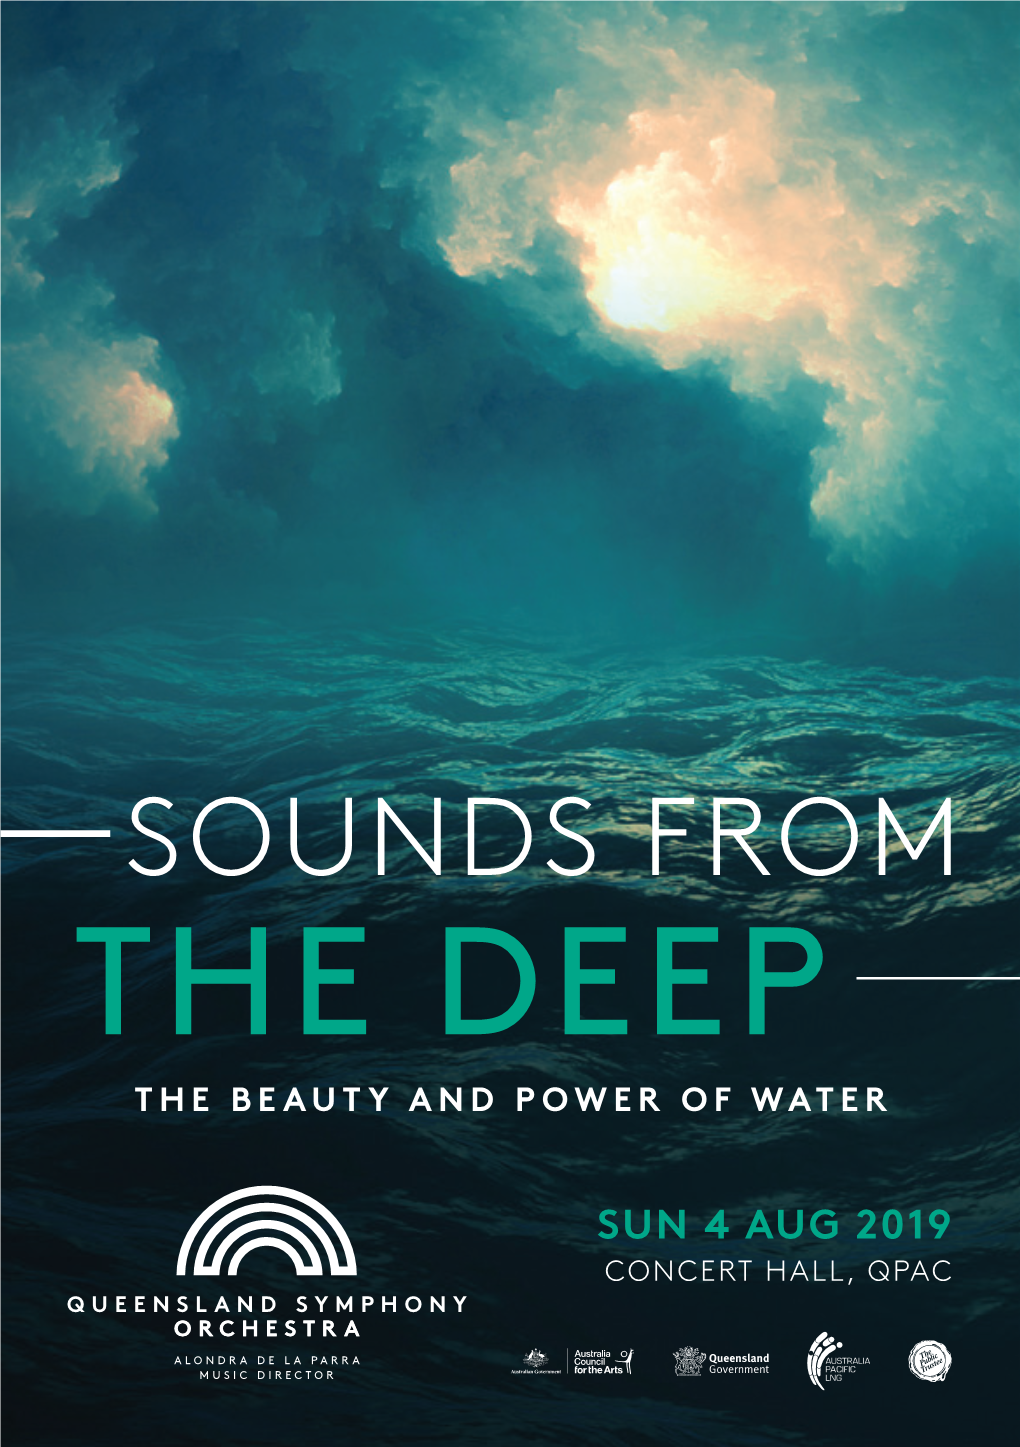 Sounds from the Deep the Beauty and Power of Water